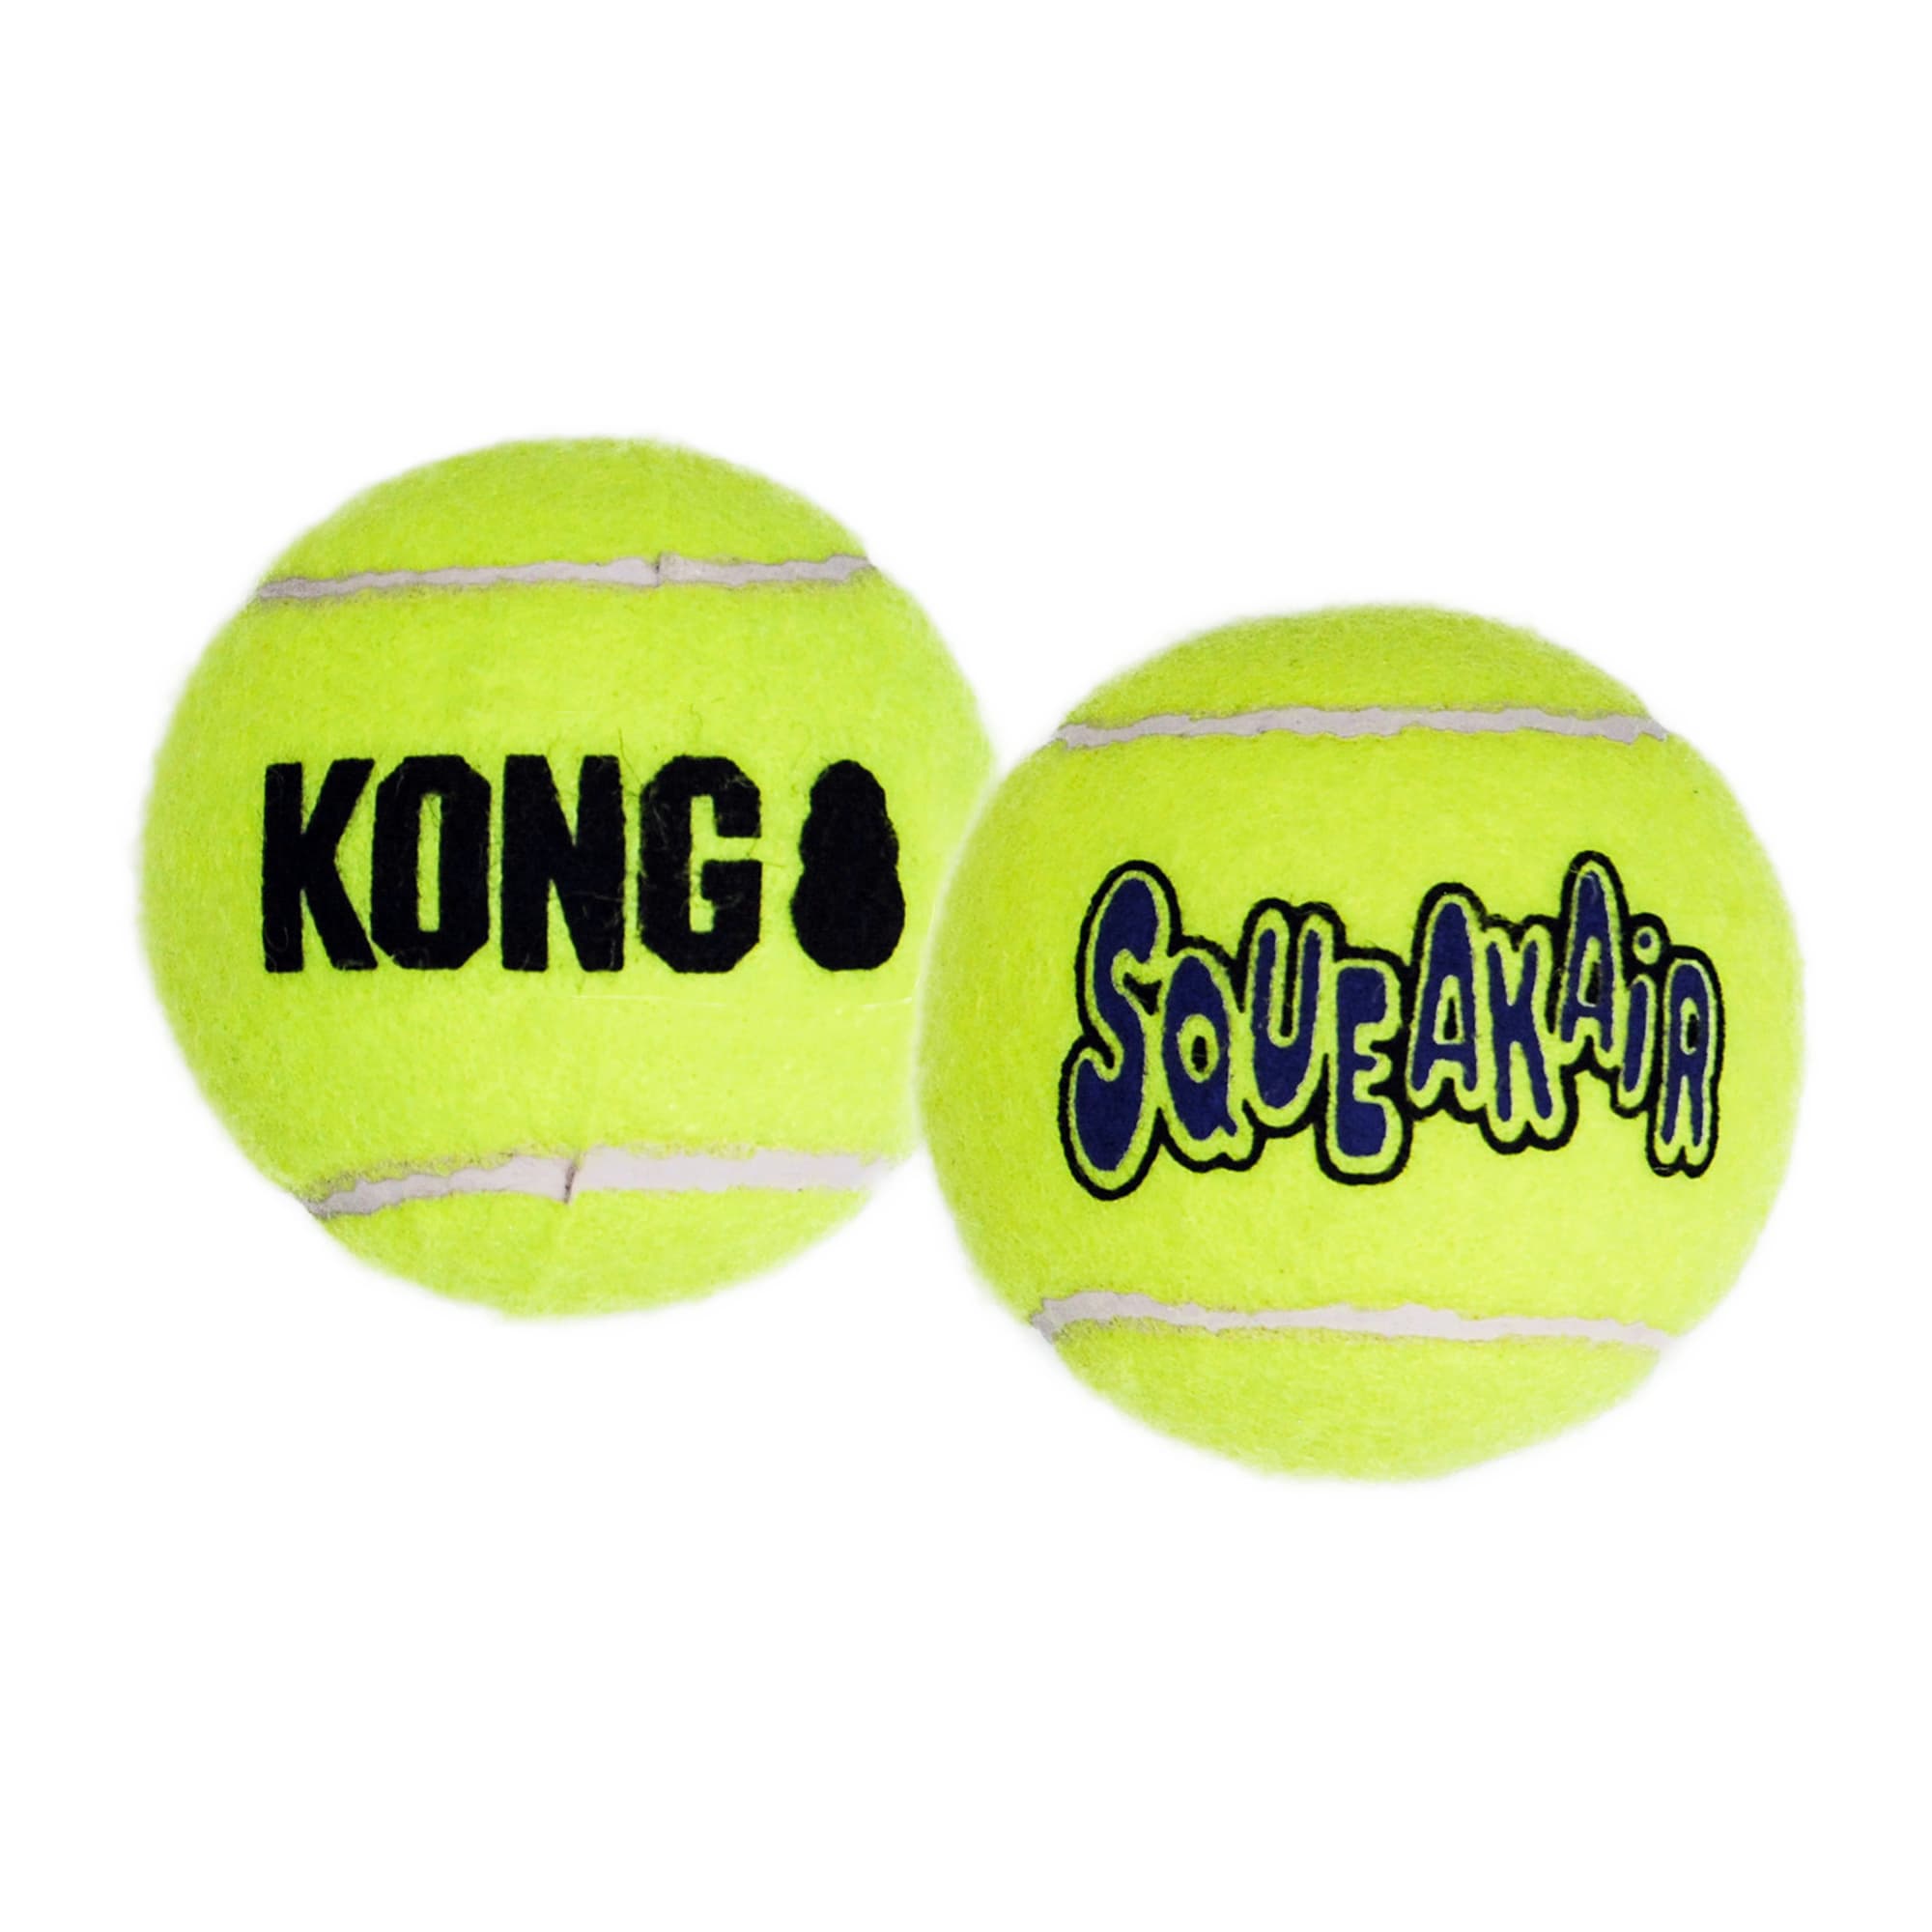 Photos - Dog Toy KONG SqueakAir Ball for Dogs, Large, Yellow AST1B 